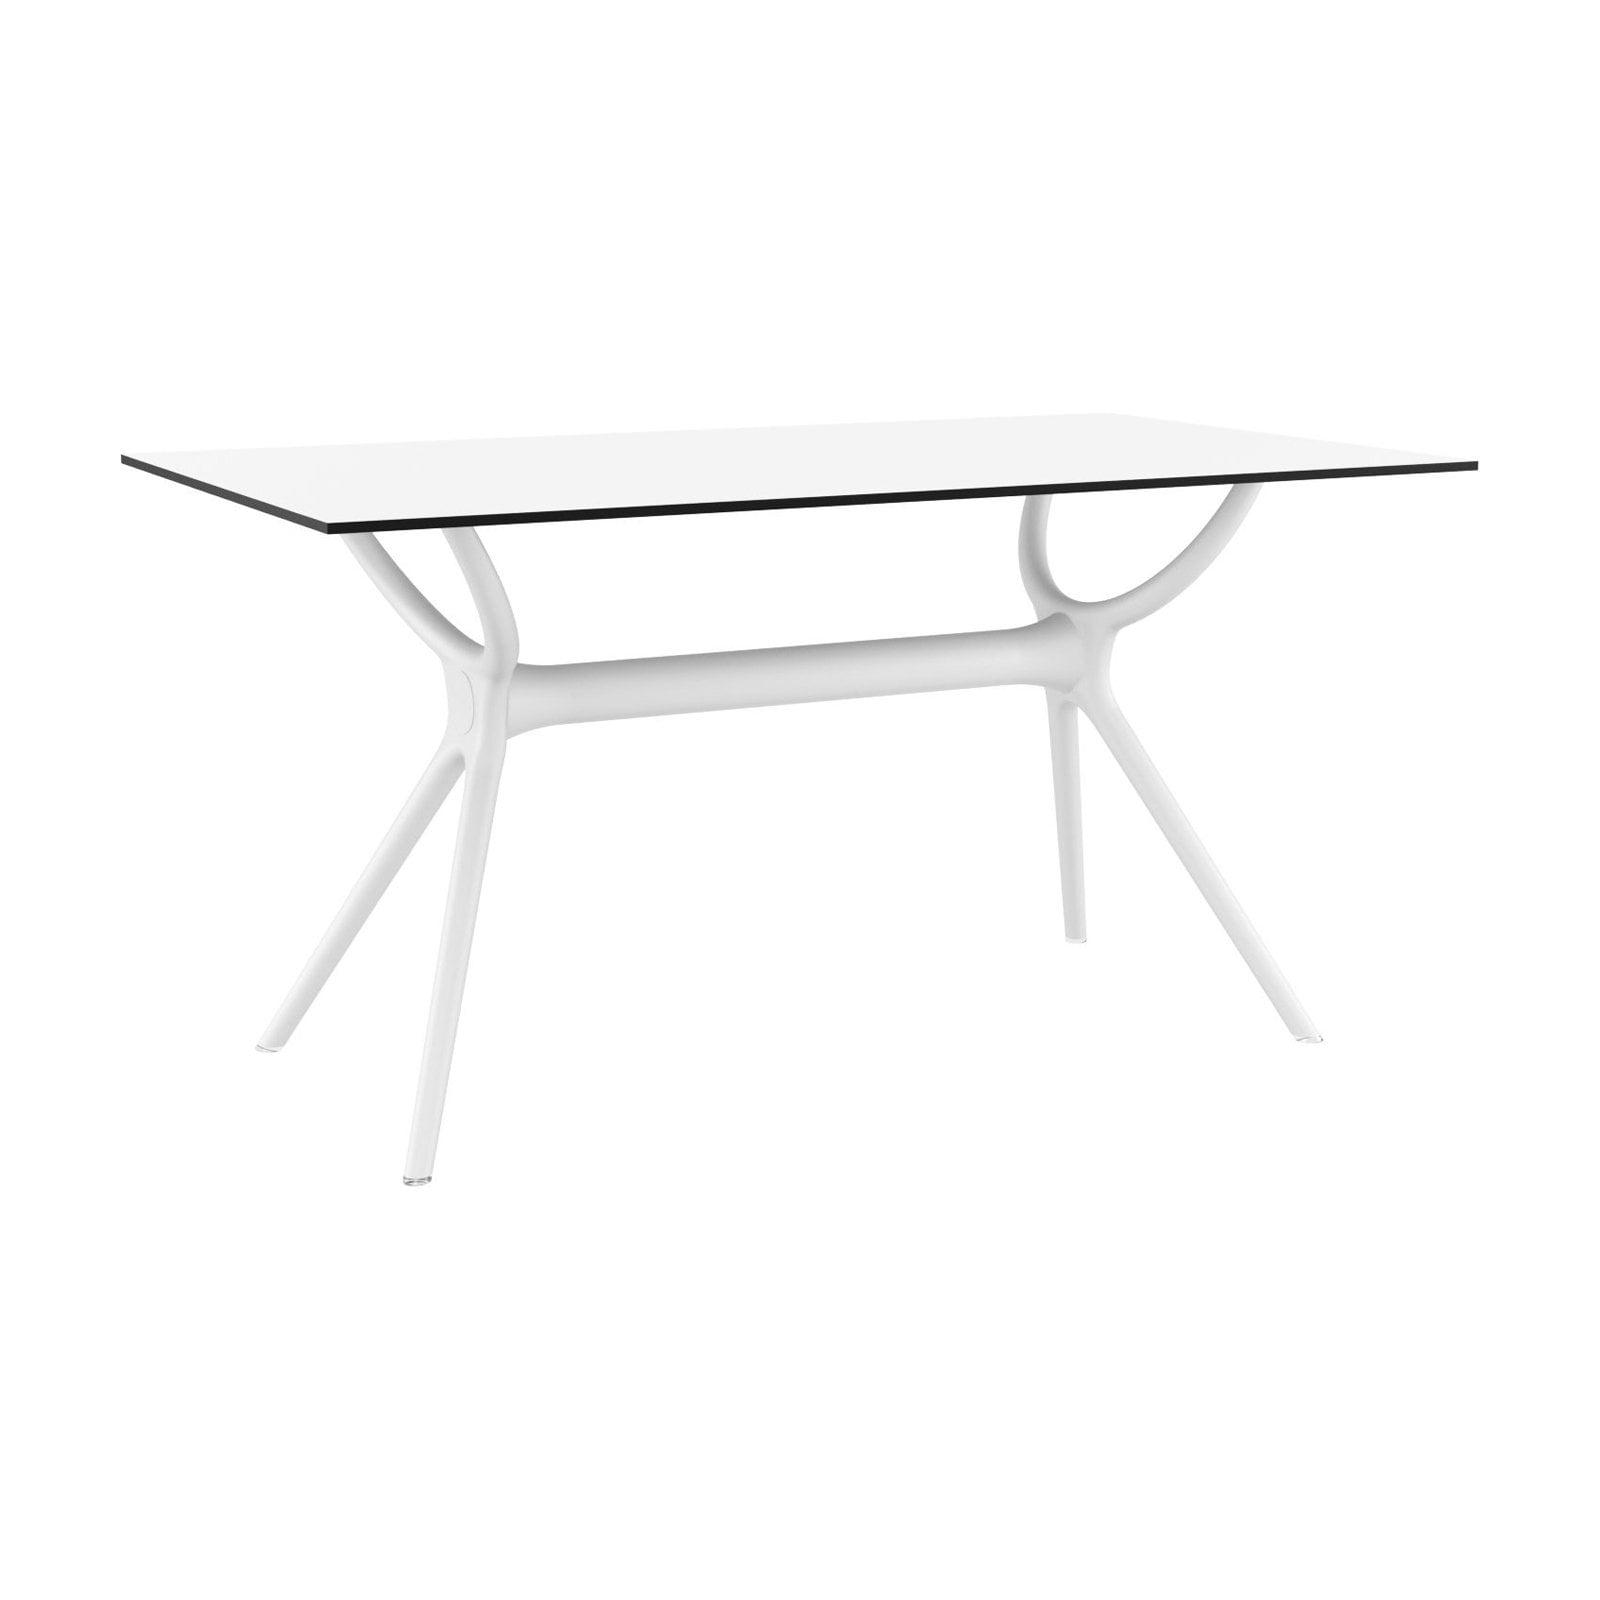 Sleek White 71" Rectangular Patio Dining Table with Air-Molded Legs